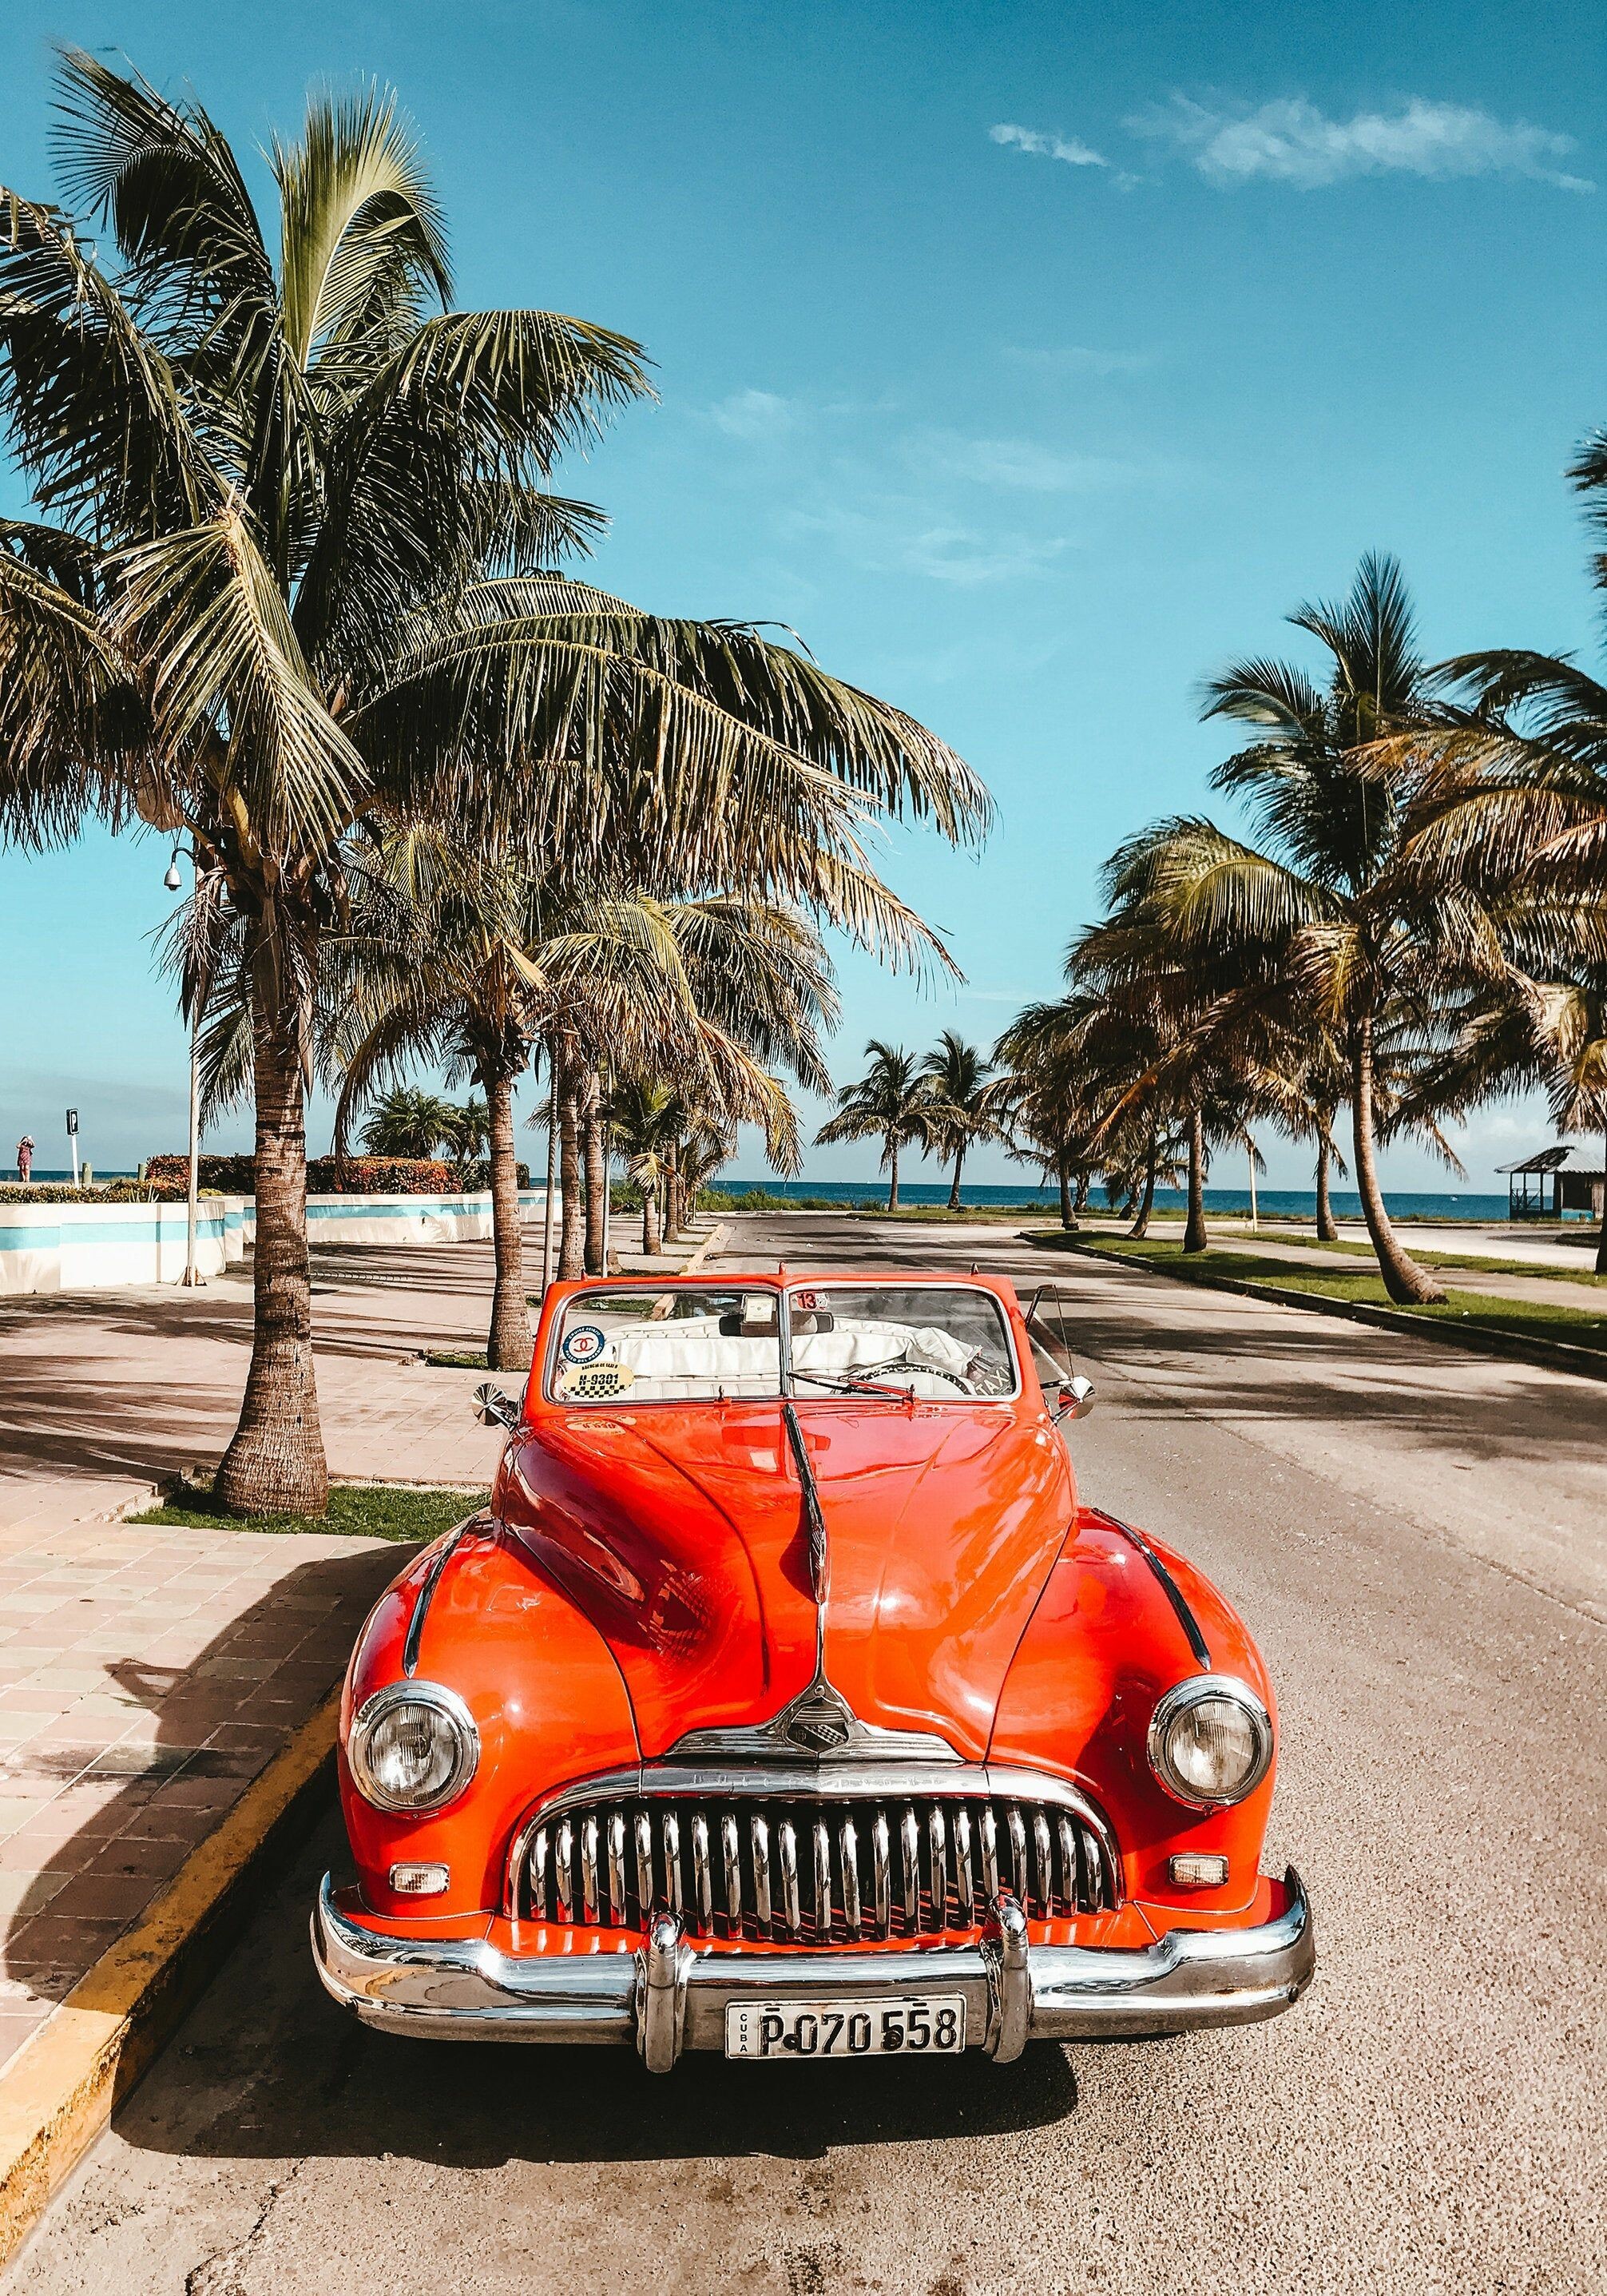 Cuba: From the 15th century, the country was a colony of Spain, Retro car. 2020x2880 HD Wallpaper.